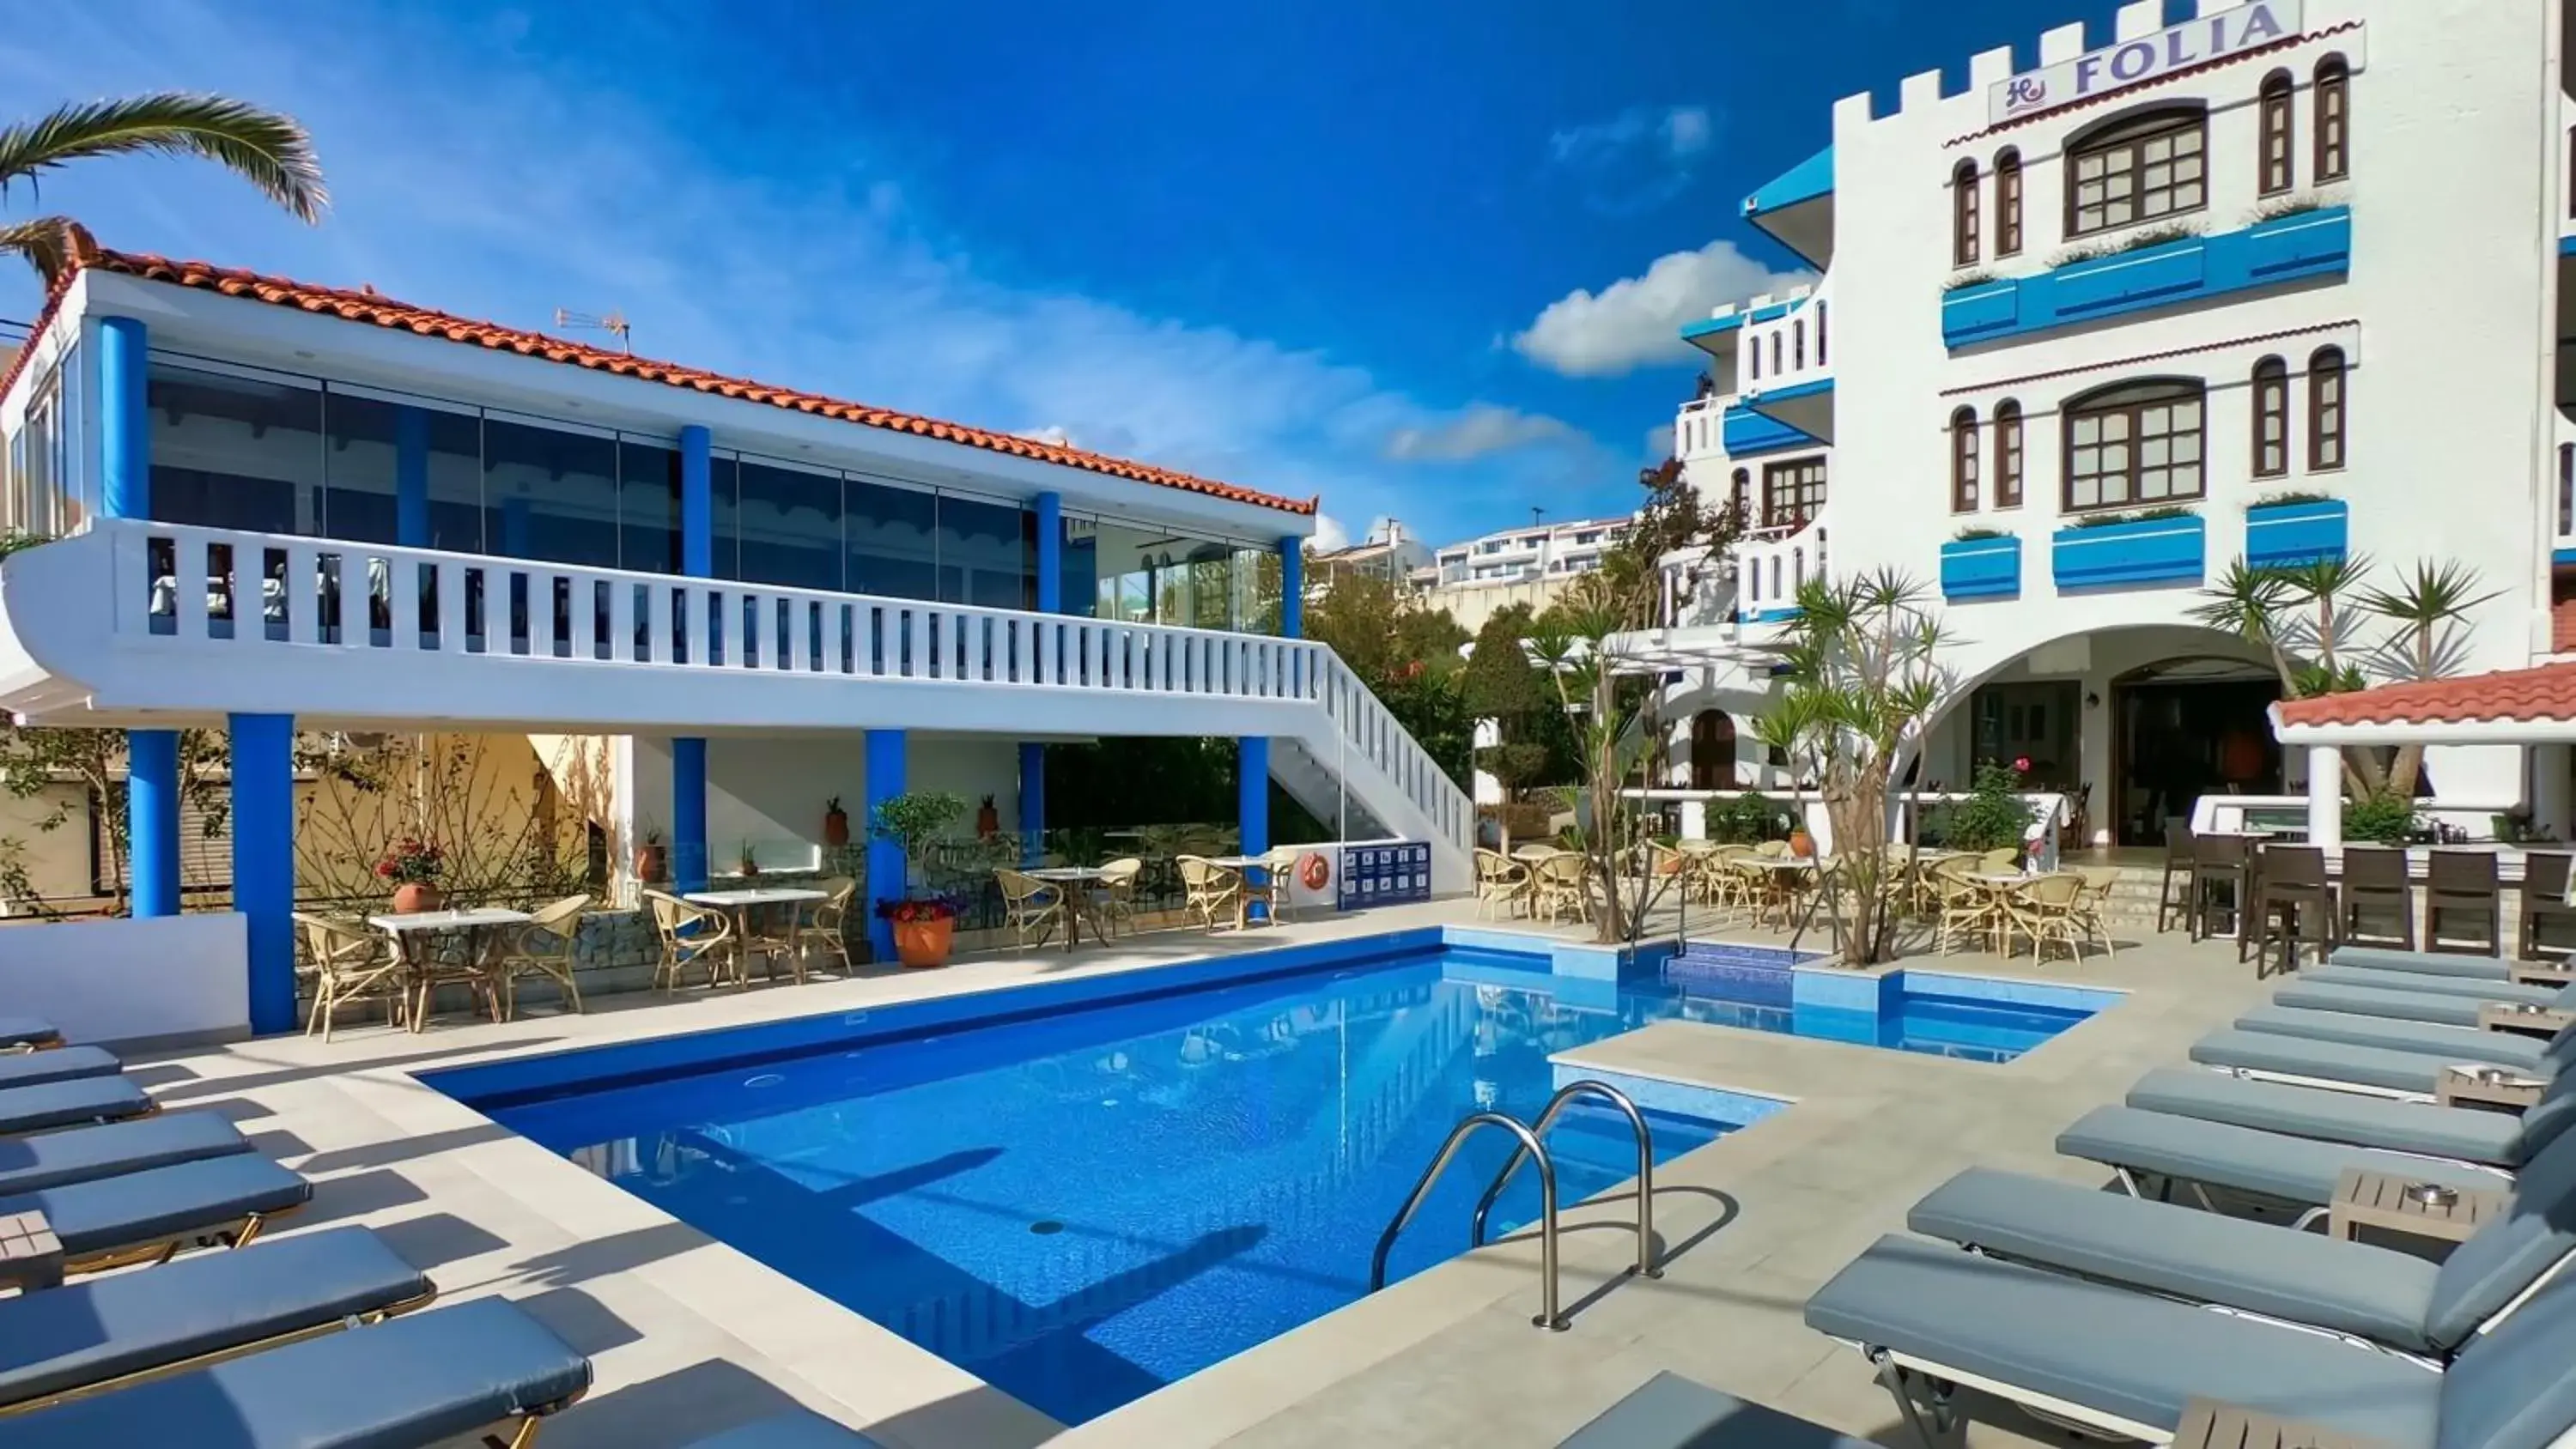 Property building, Swimming Pool in Folia Apartments